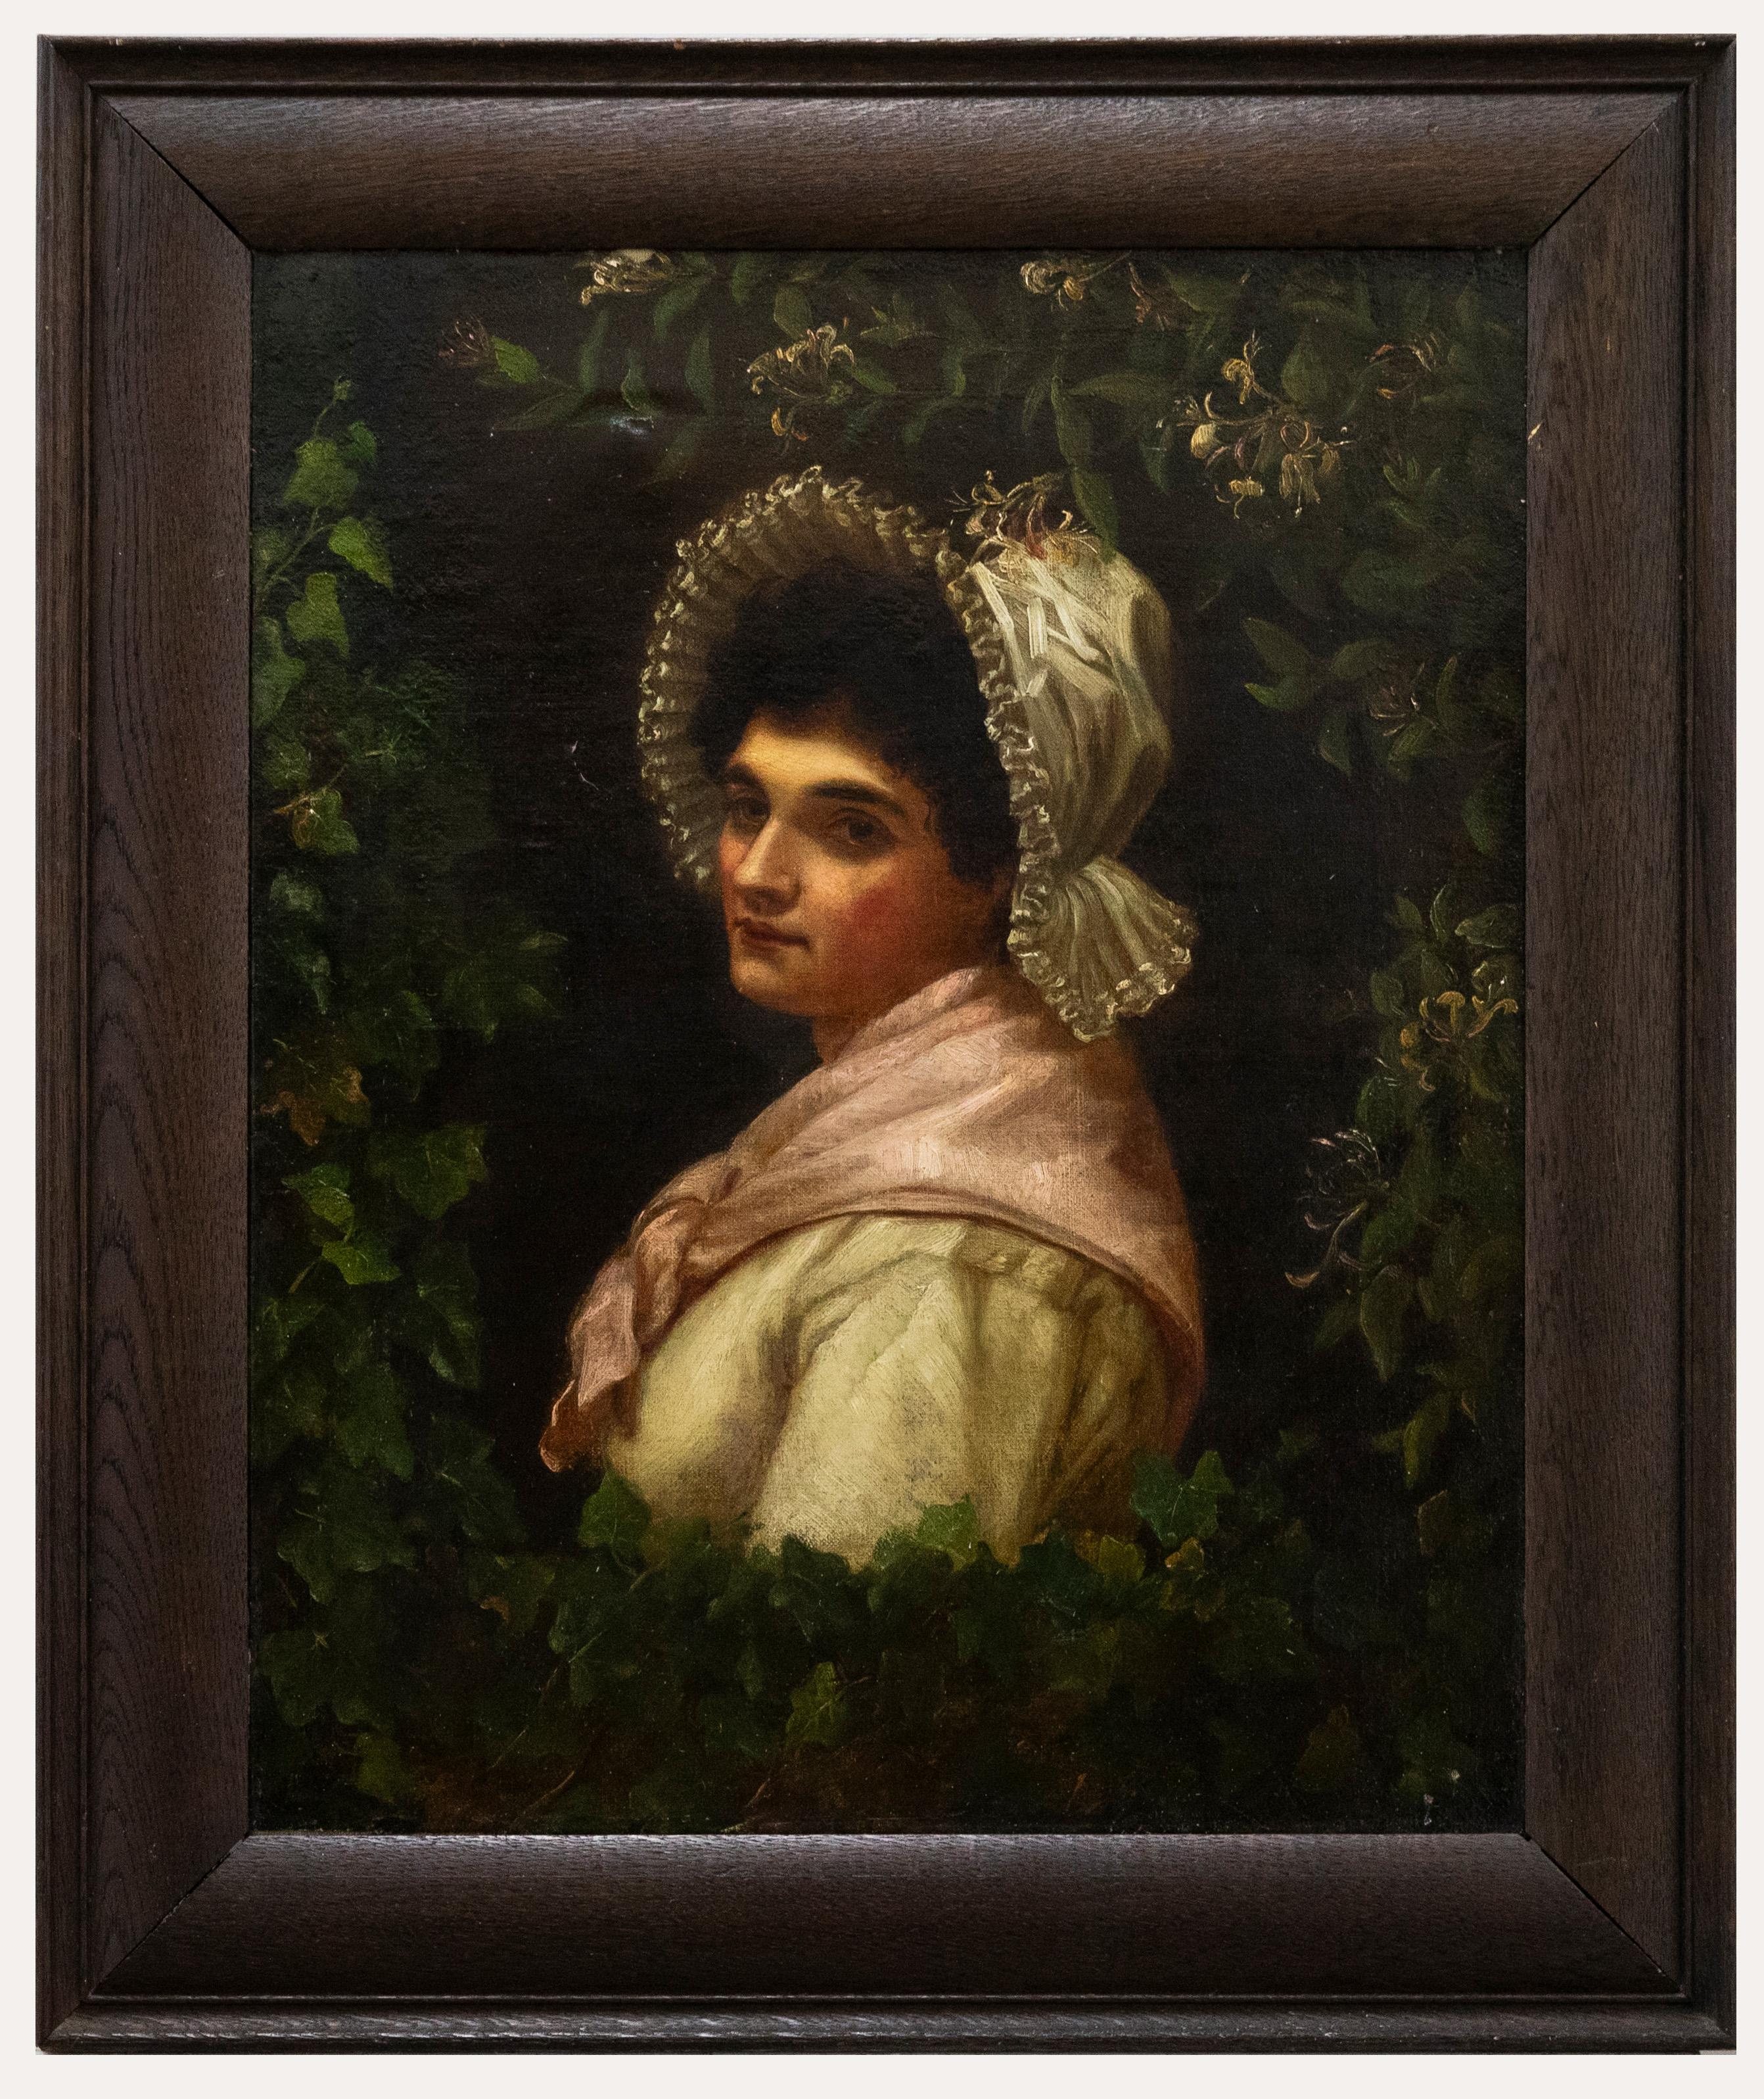 Unknown Portrait Painting - Victorian School  19th Century Oil - Woman Through an Ivy Wreath